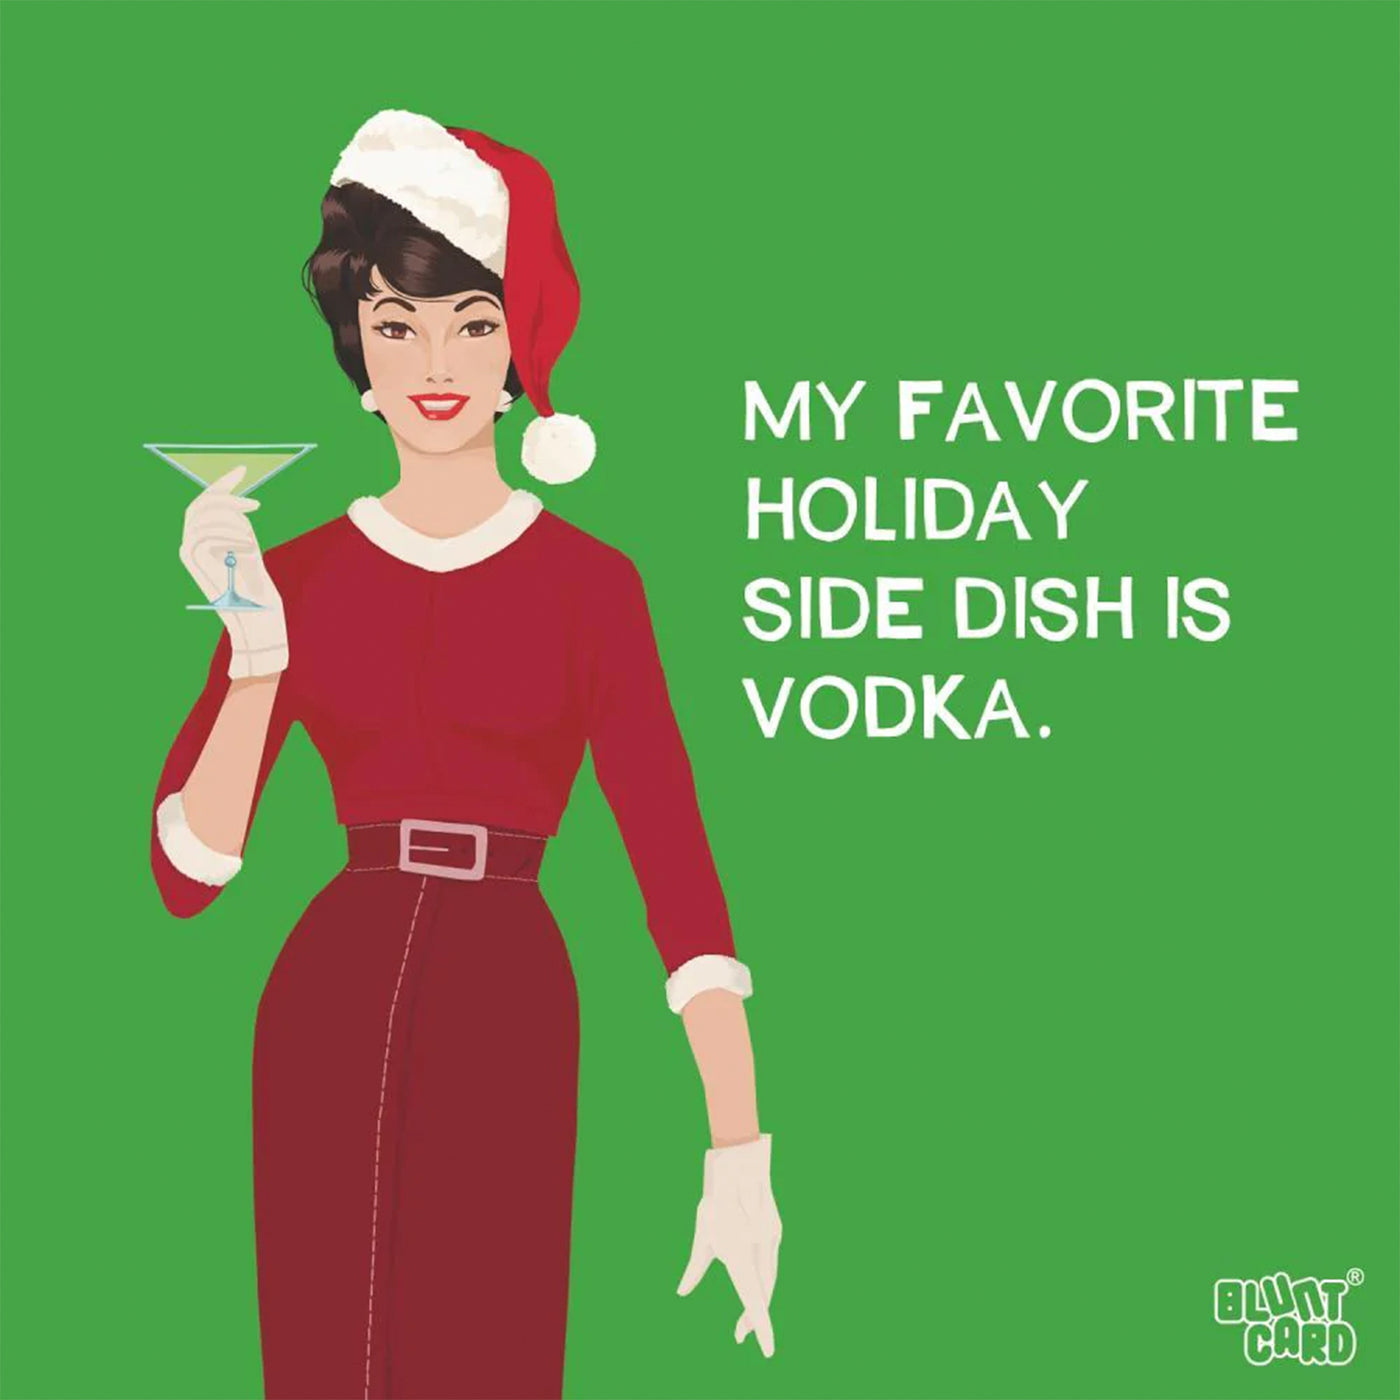 My Favorite Holiday Side Dish is Vodka